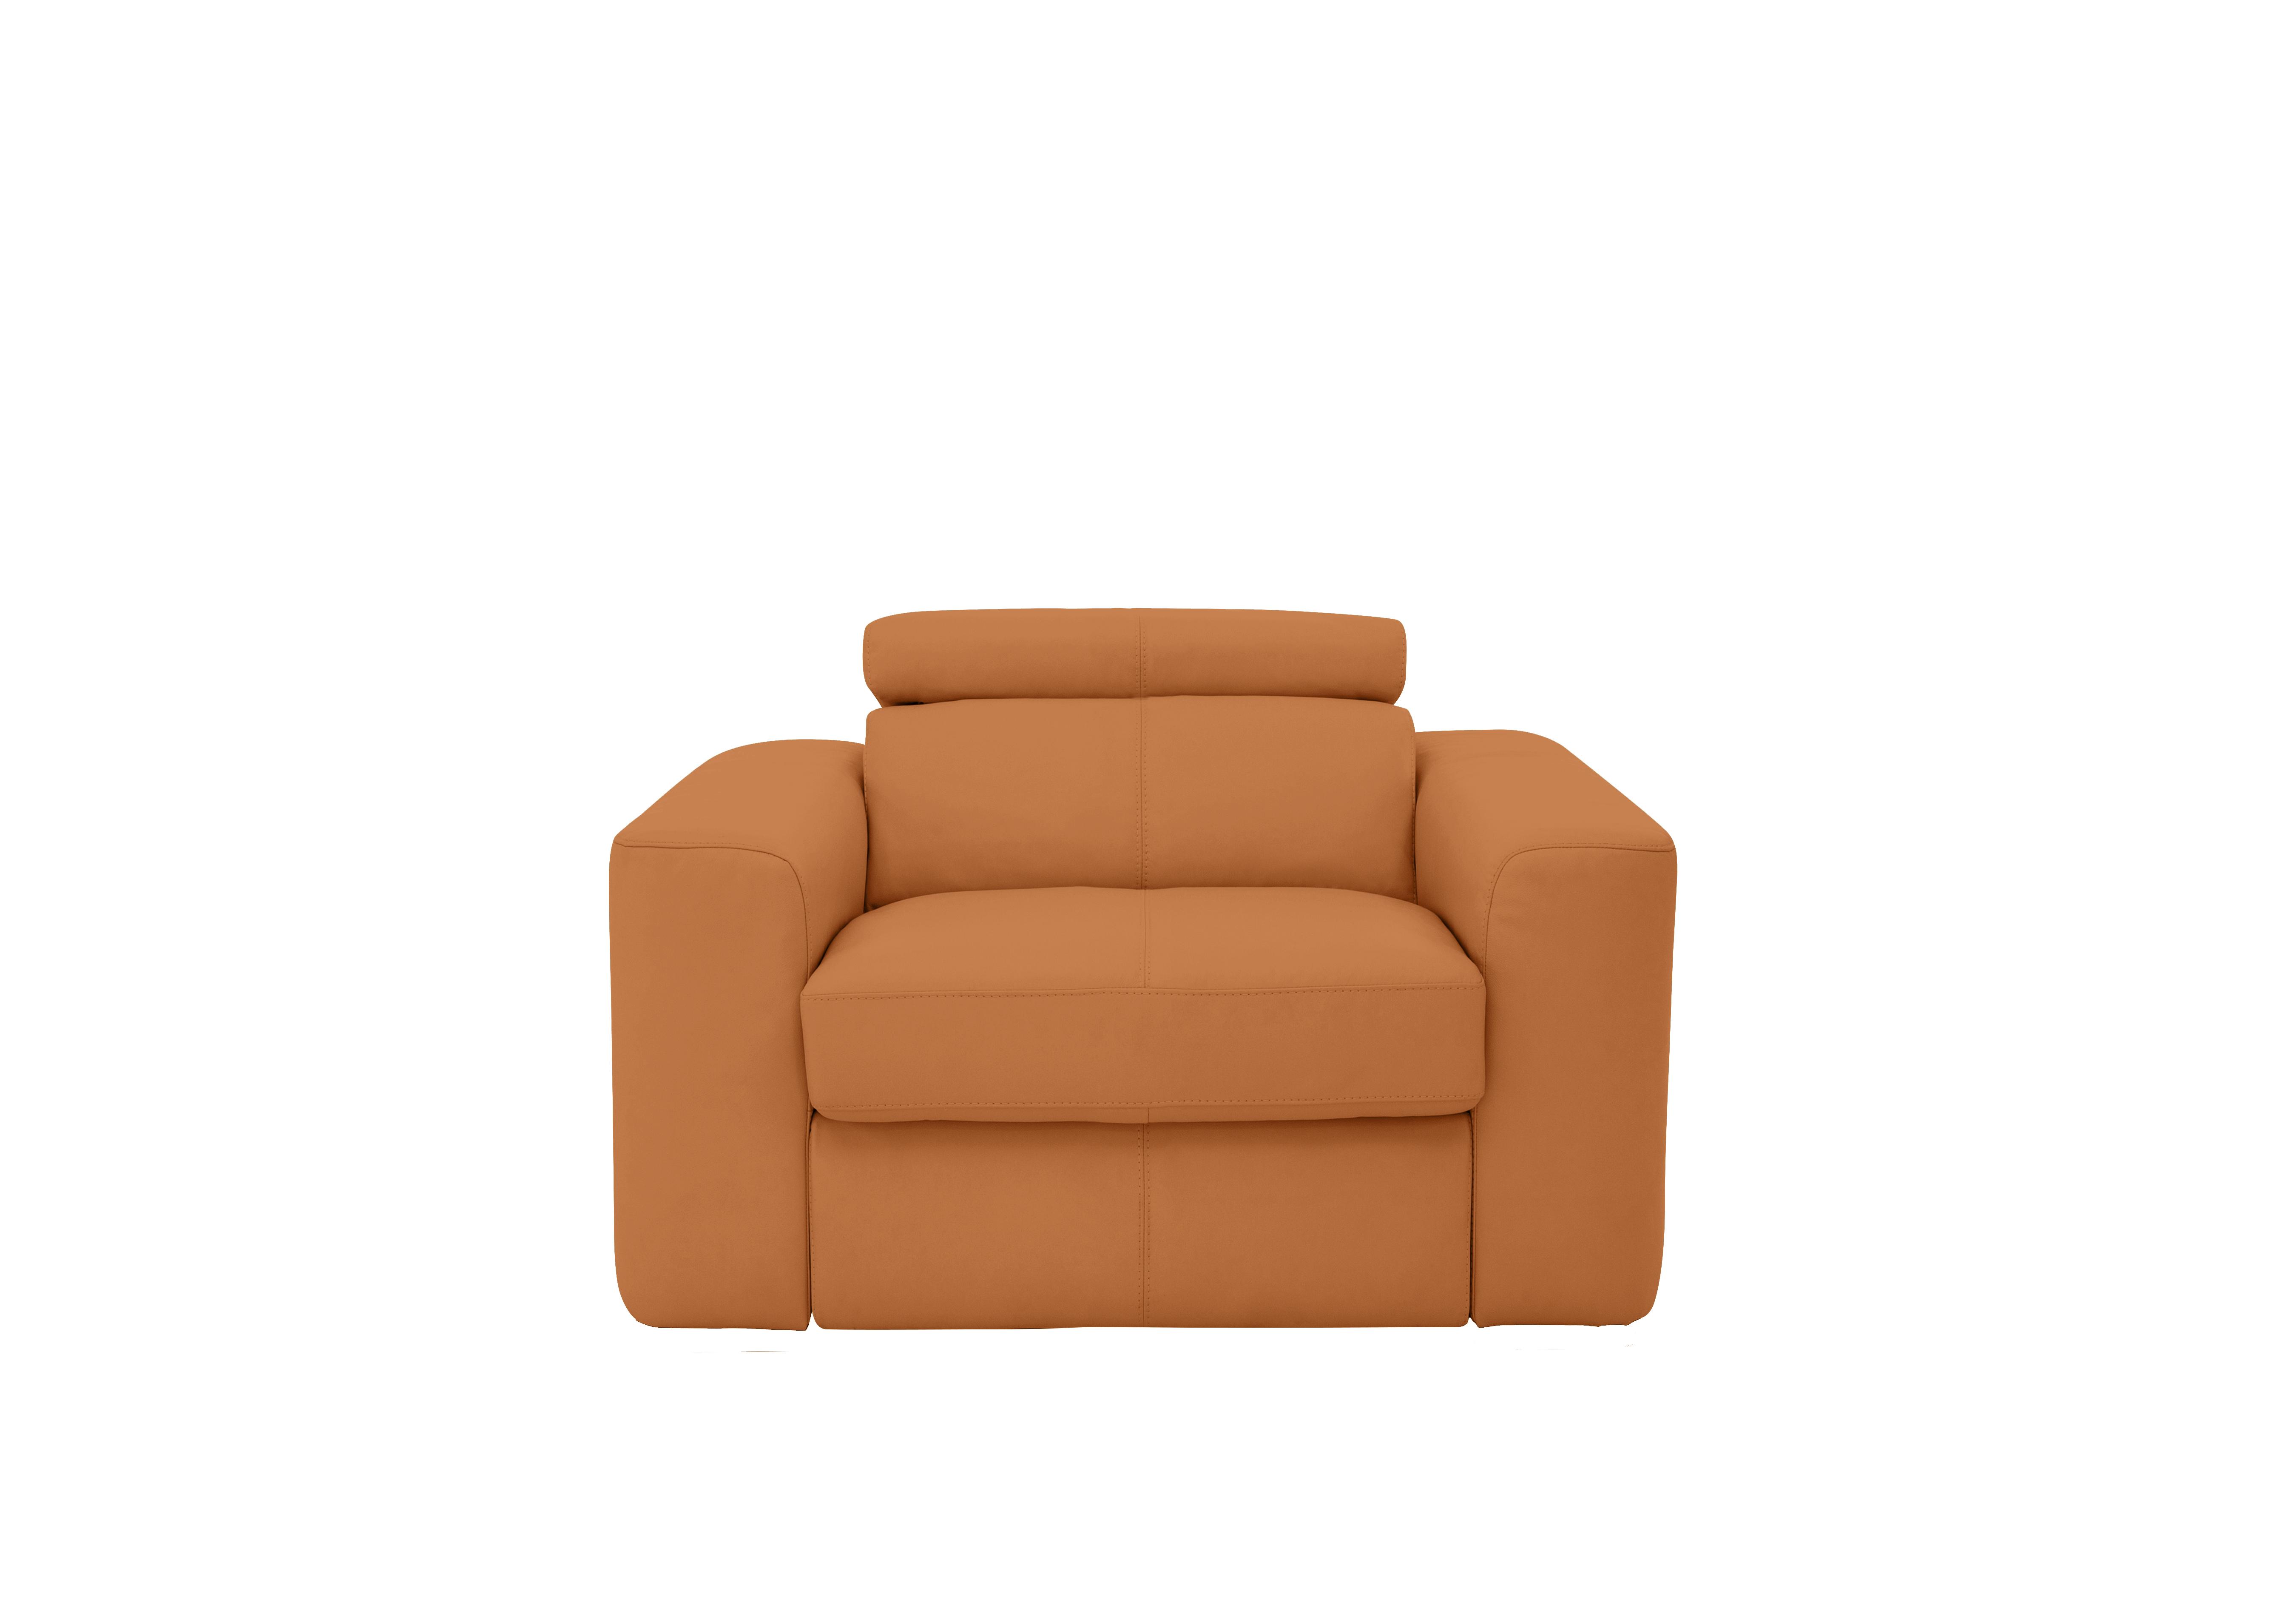 Infinity Leather Armchair in Bv-335e Honey Yellow on Furniture Village